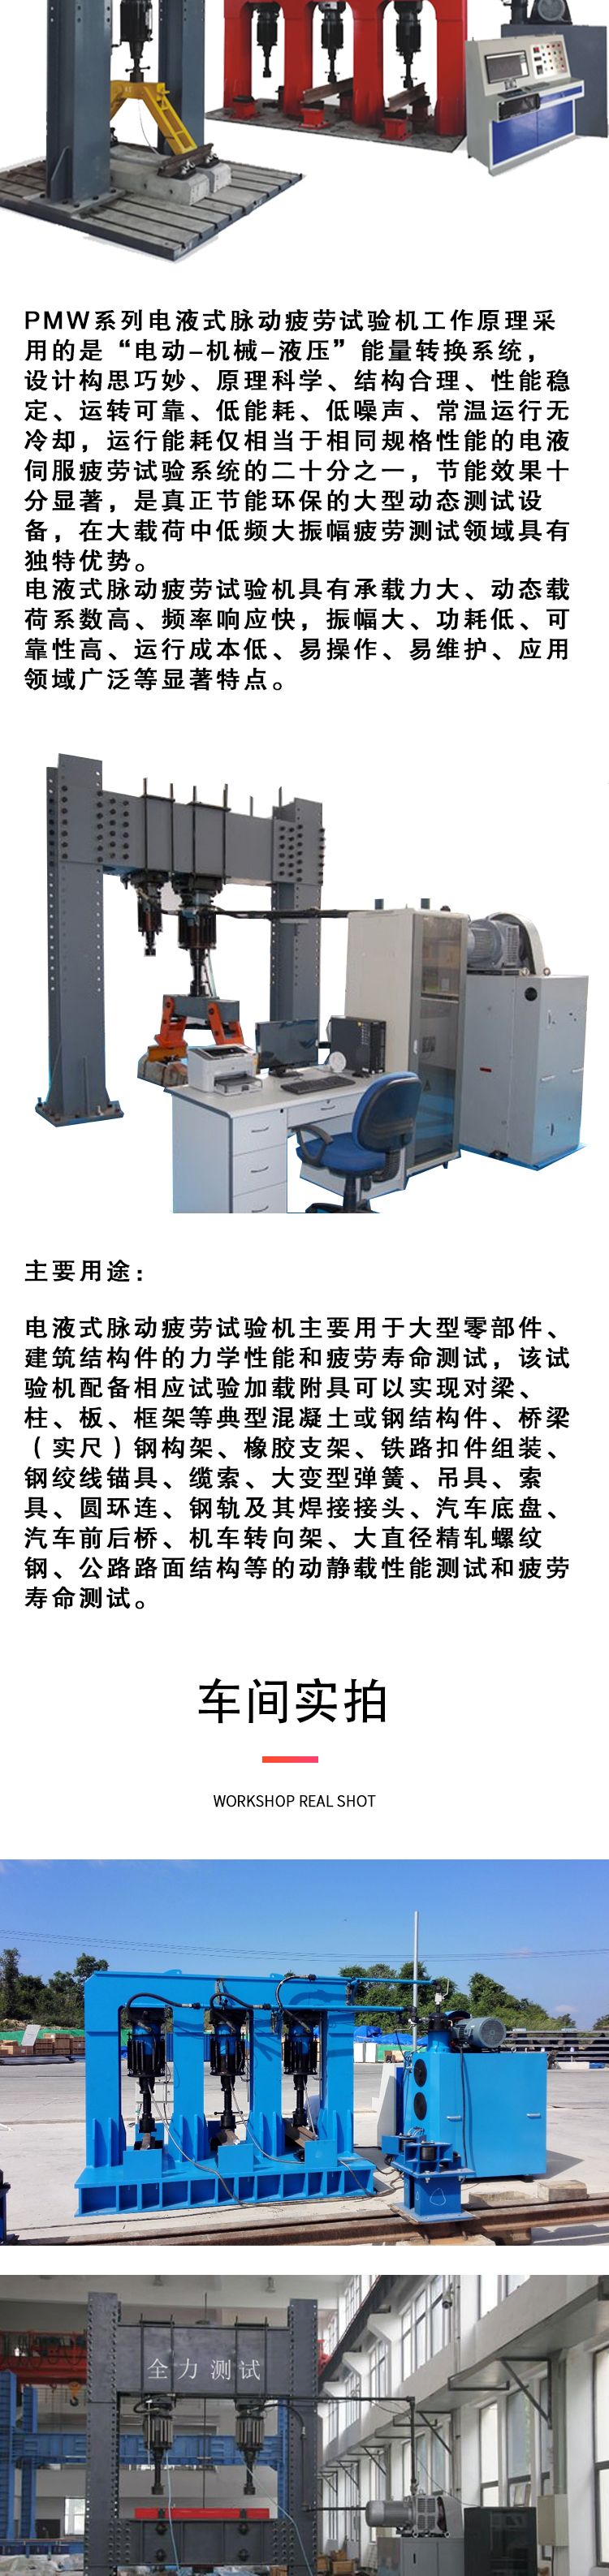 Fully customize PMW series electro-hydraulic pulsation fatigue test mobile Statics performance test equipment